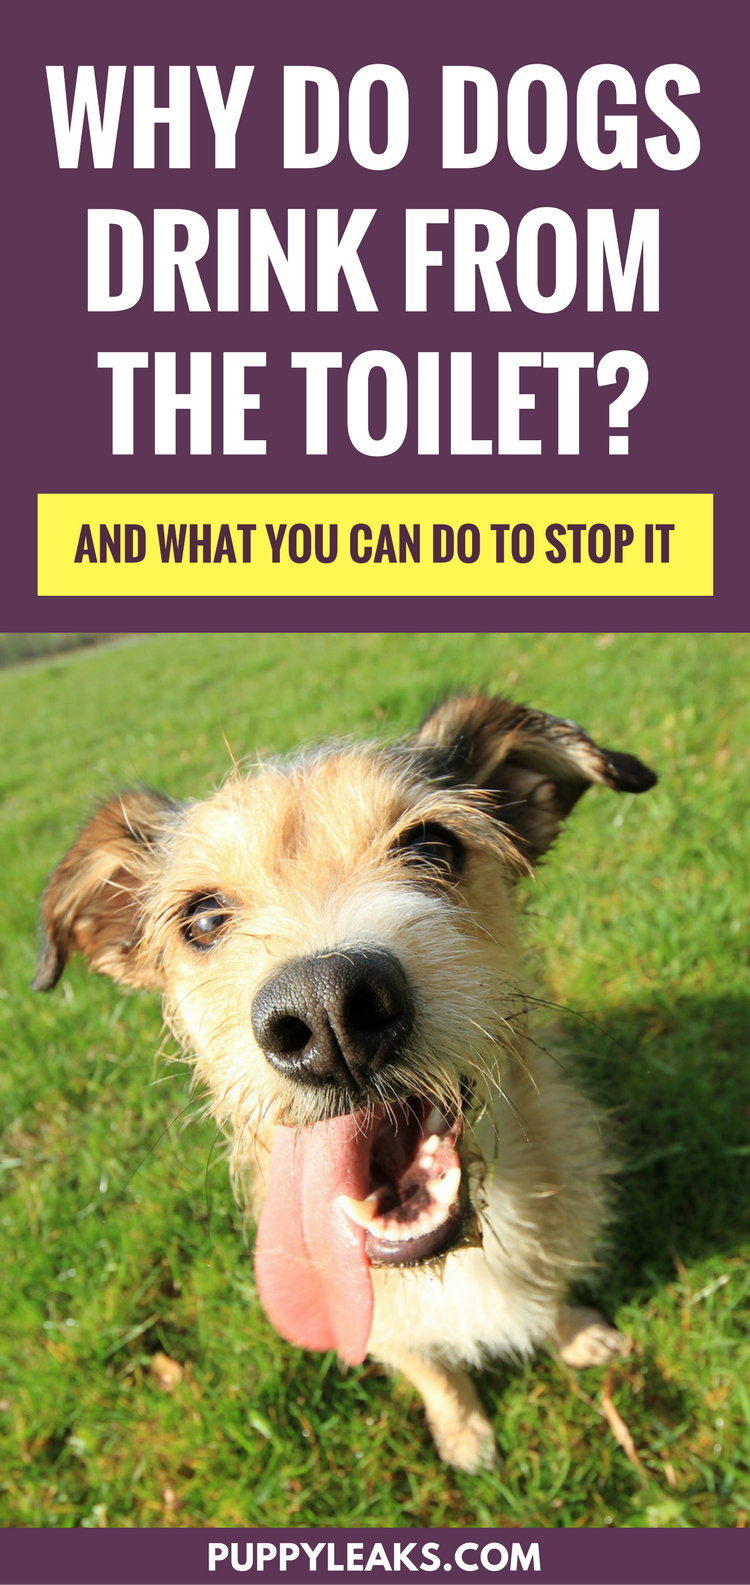 Why Do Dogs Drink From the Toilet? (and what you can do to stop it)